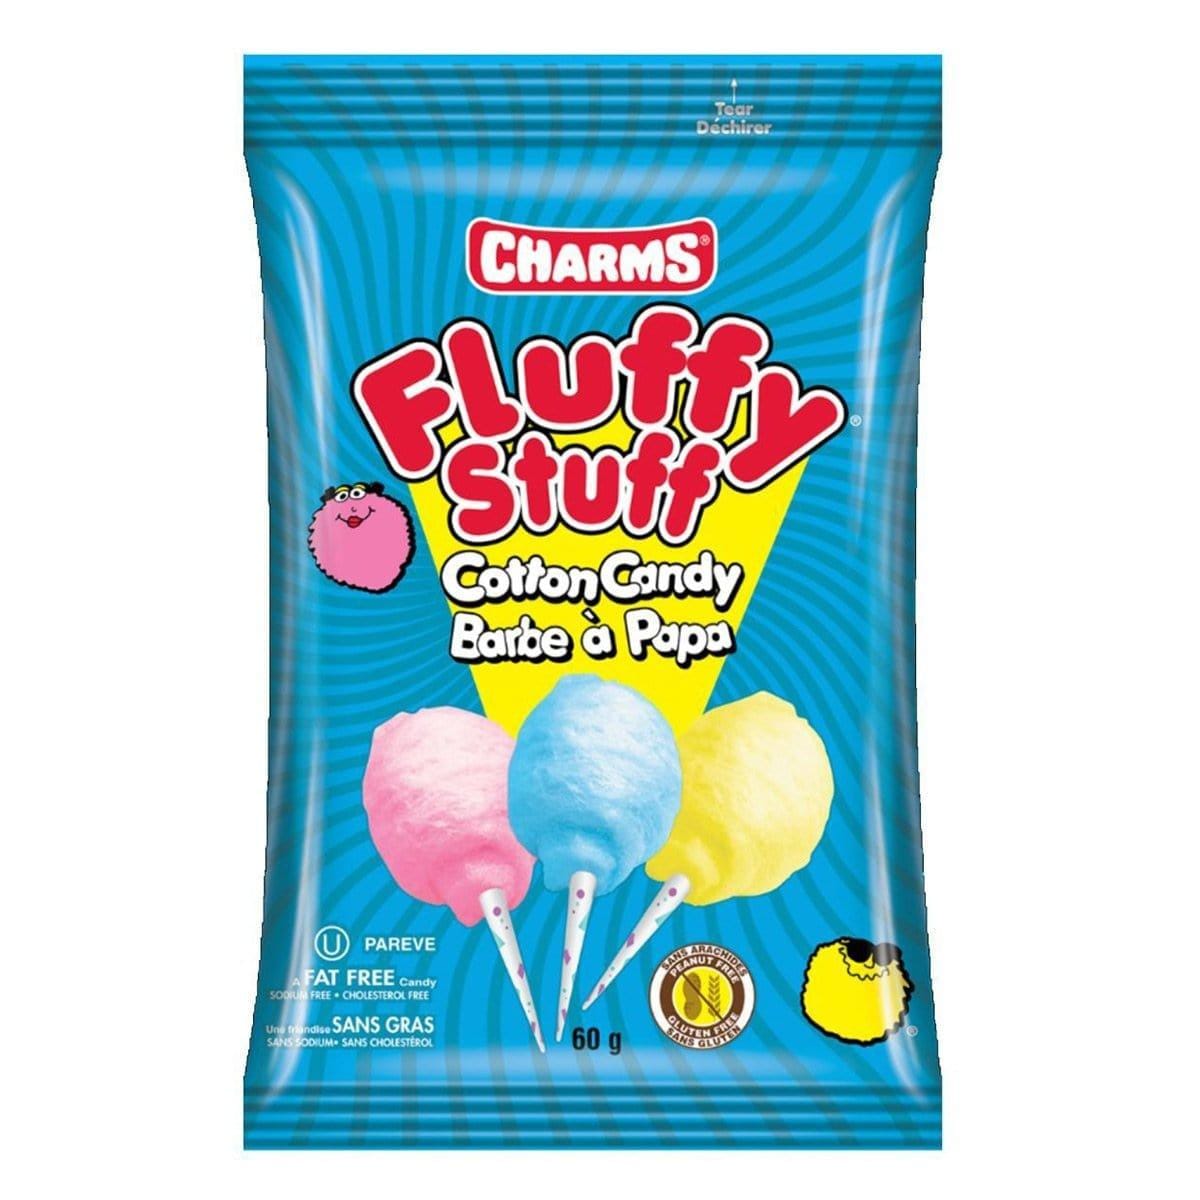 Buy Candy Fluffy Stuff Cotton Candy sold at Party Expert